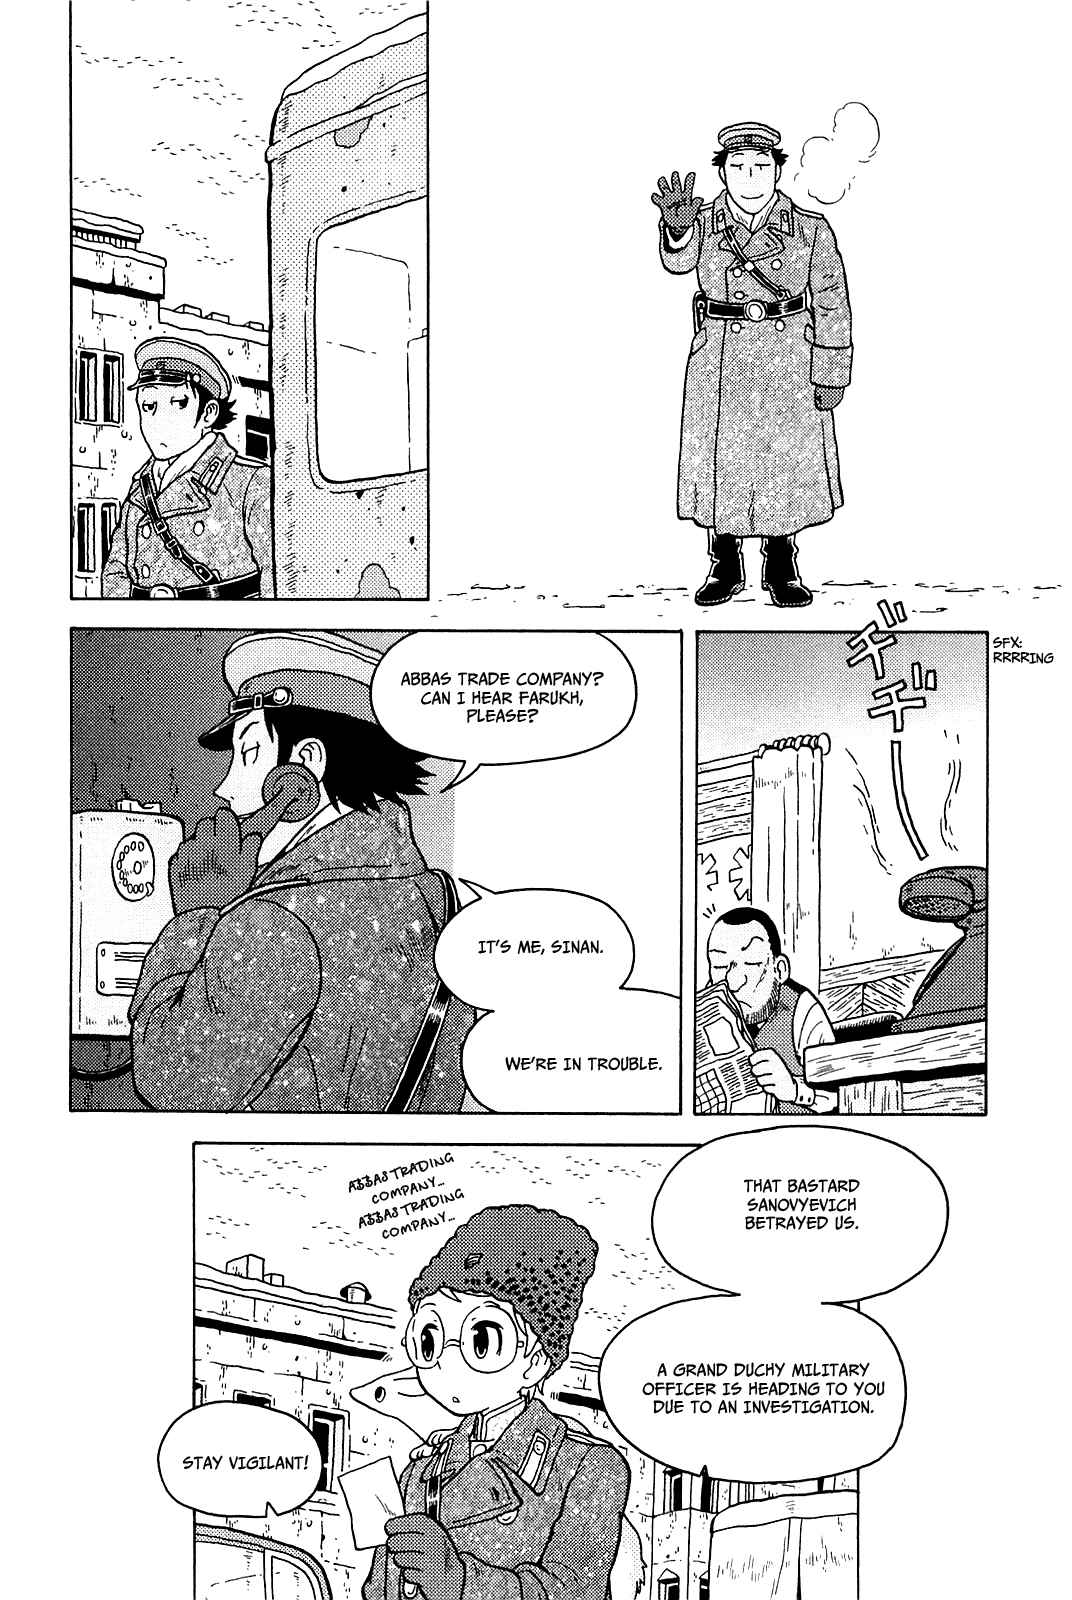 Guns and Stamps Vol. 3 Ch. 18 Too Many Gangster Movies